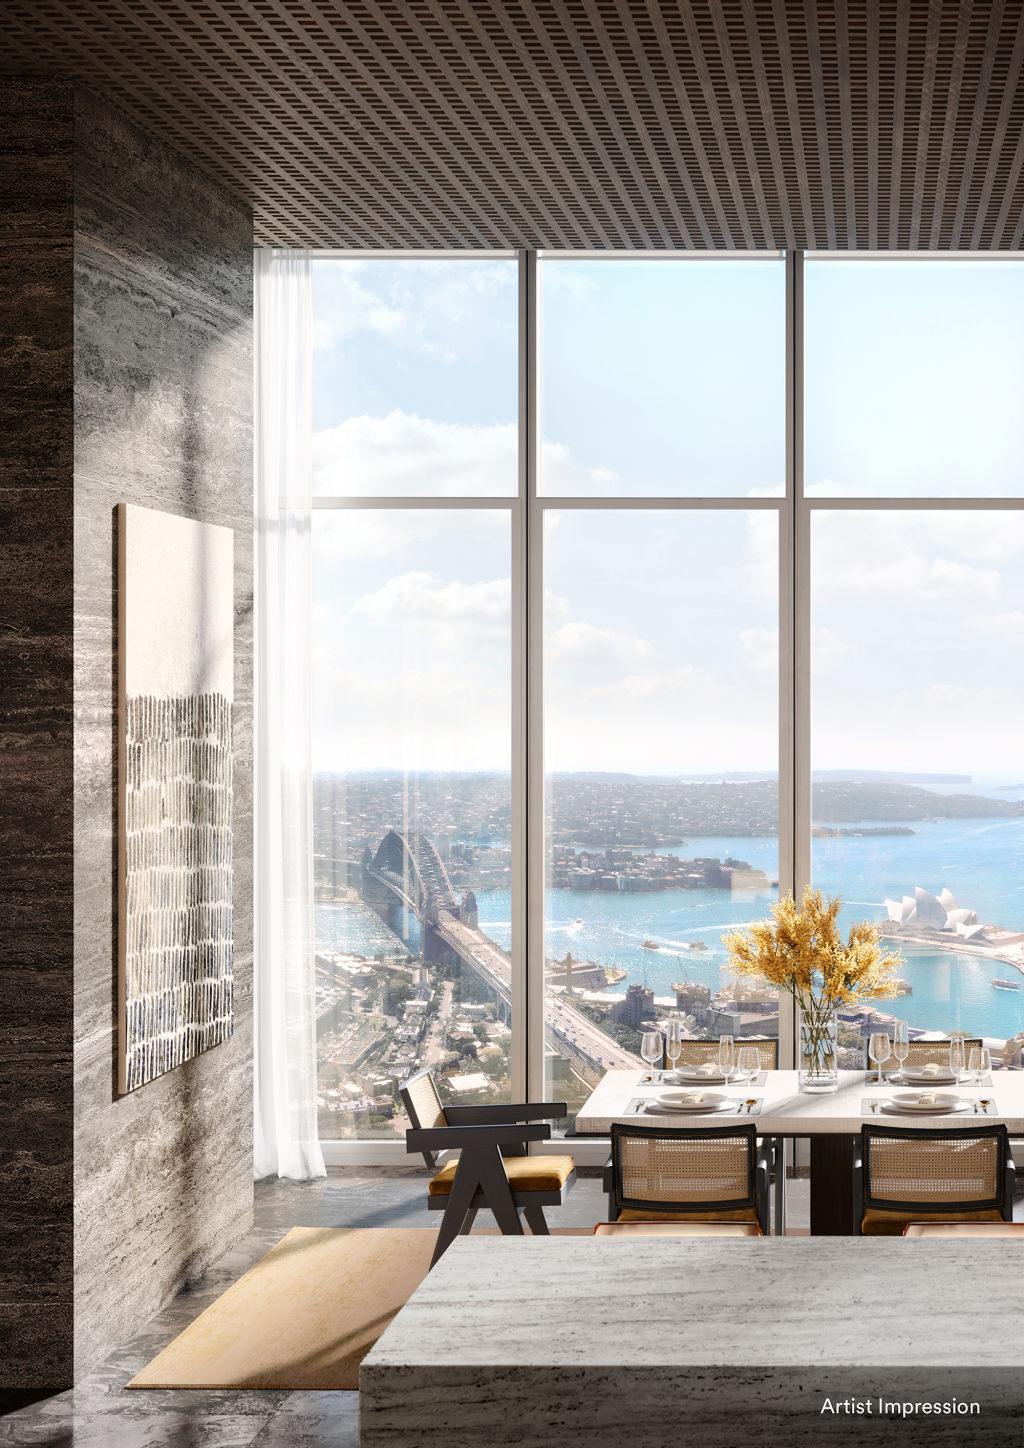 The buyer now has one of the best views in Sydney. Photo: Lendlease